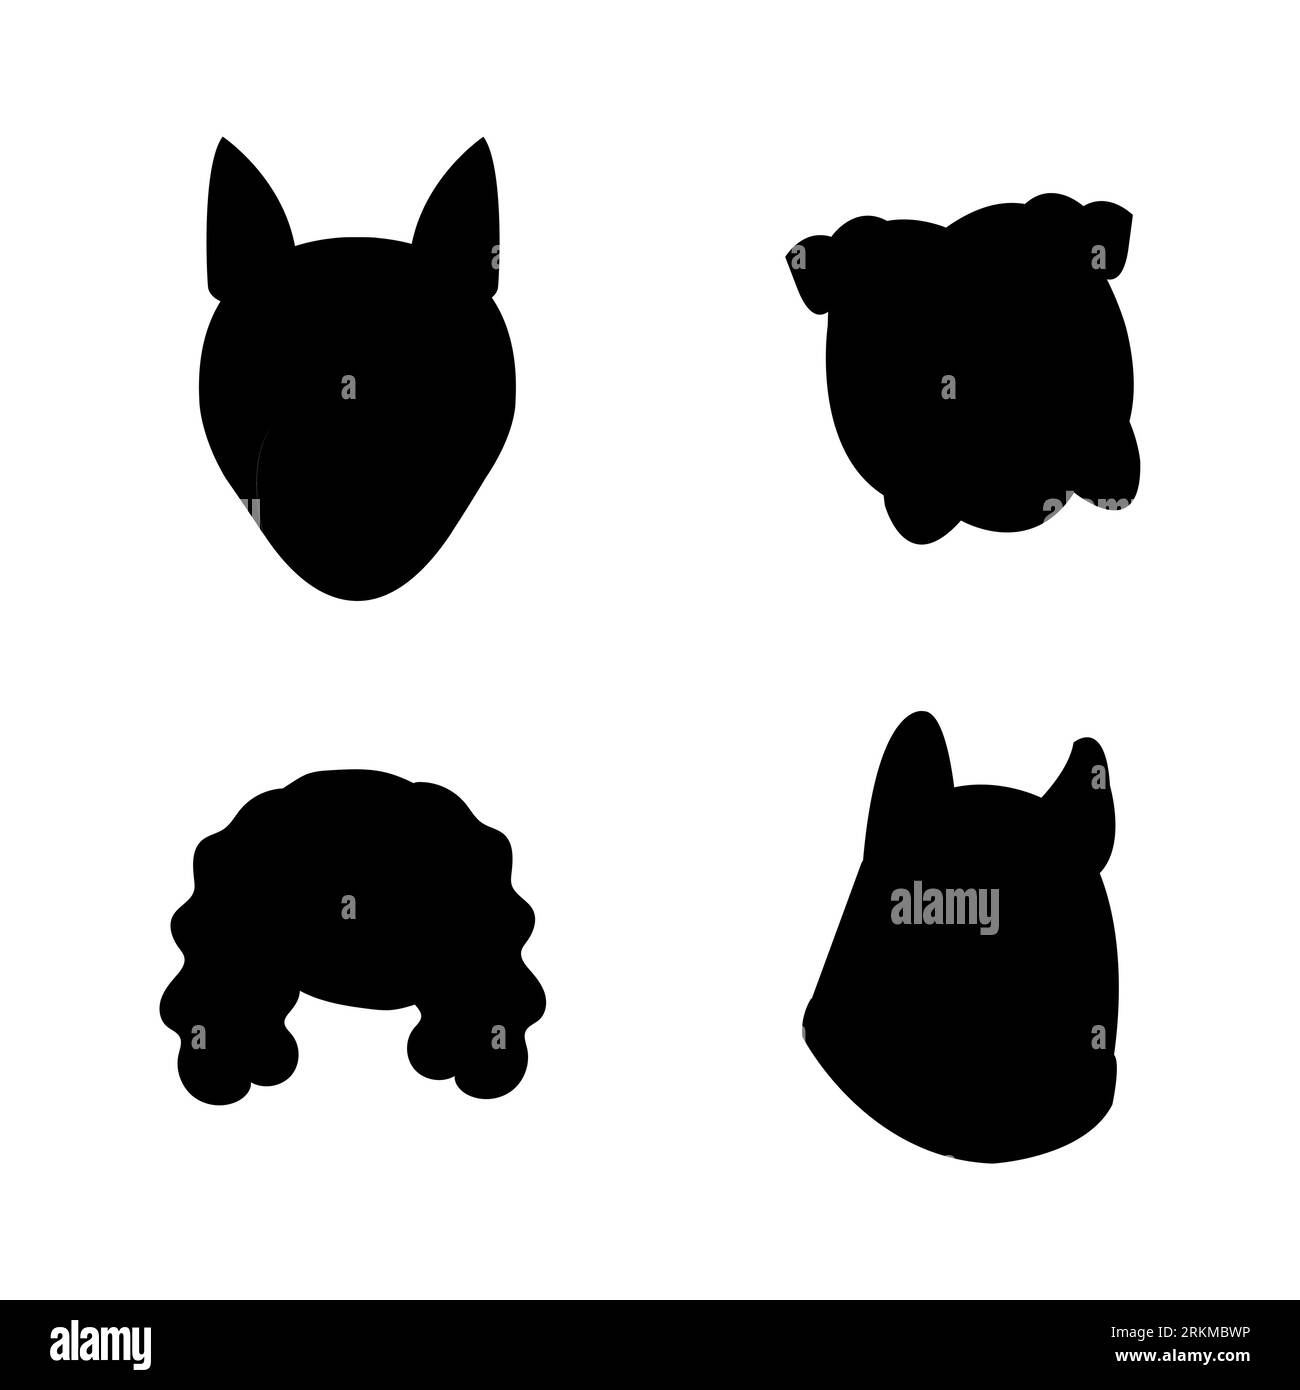 Black silhouette of four dog head mascots, cute puppy faces, pug dog, Poodle breed, husky, and pit bull vector isolated on white background Stock Vector